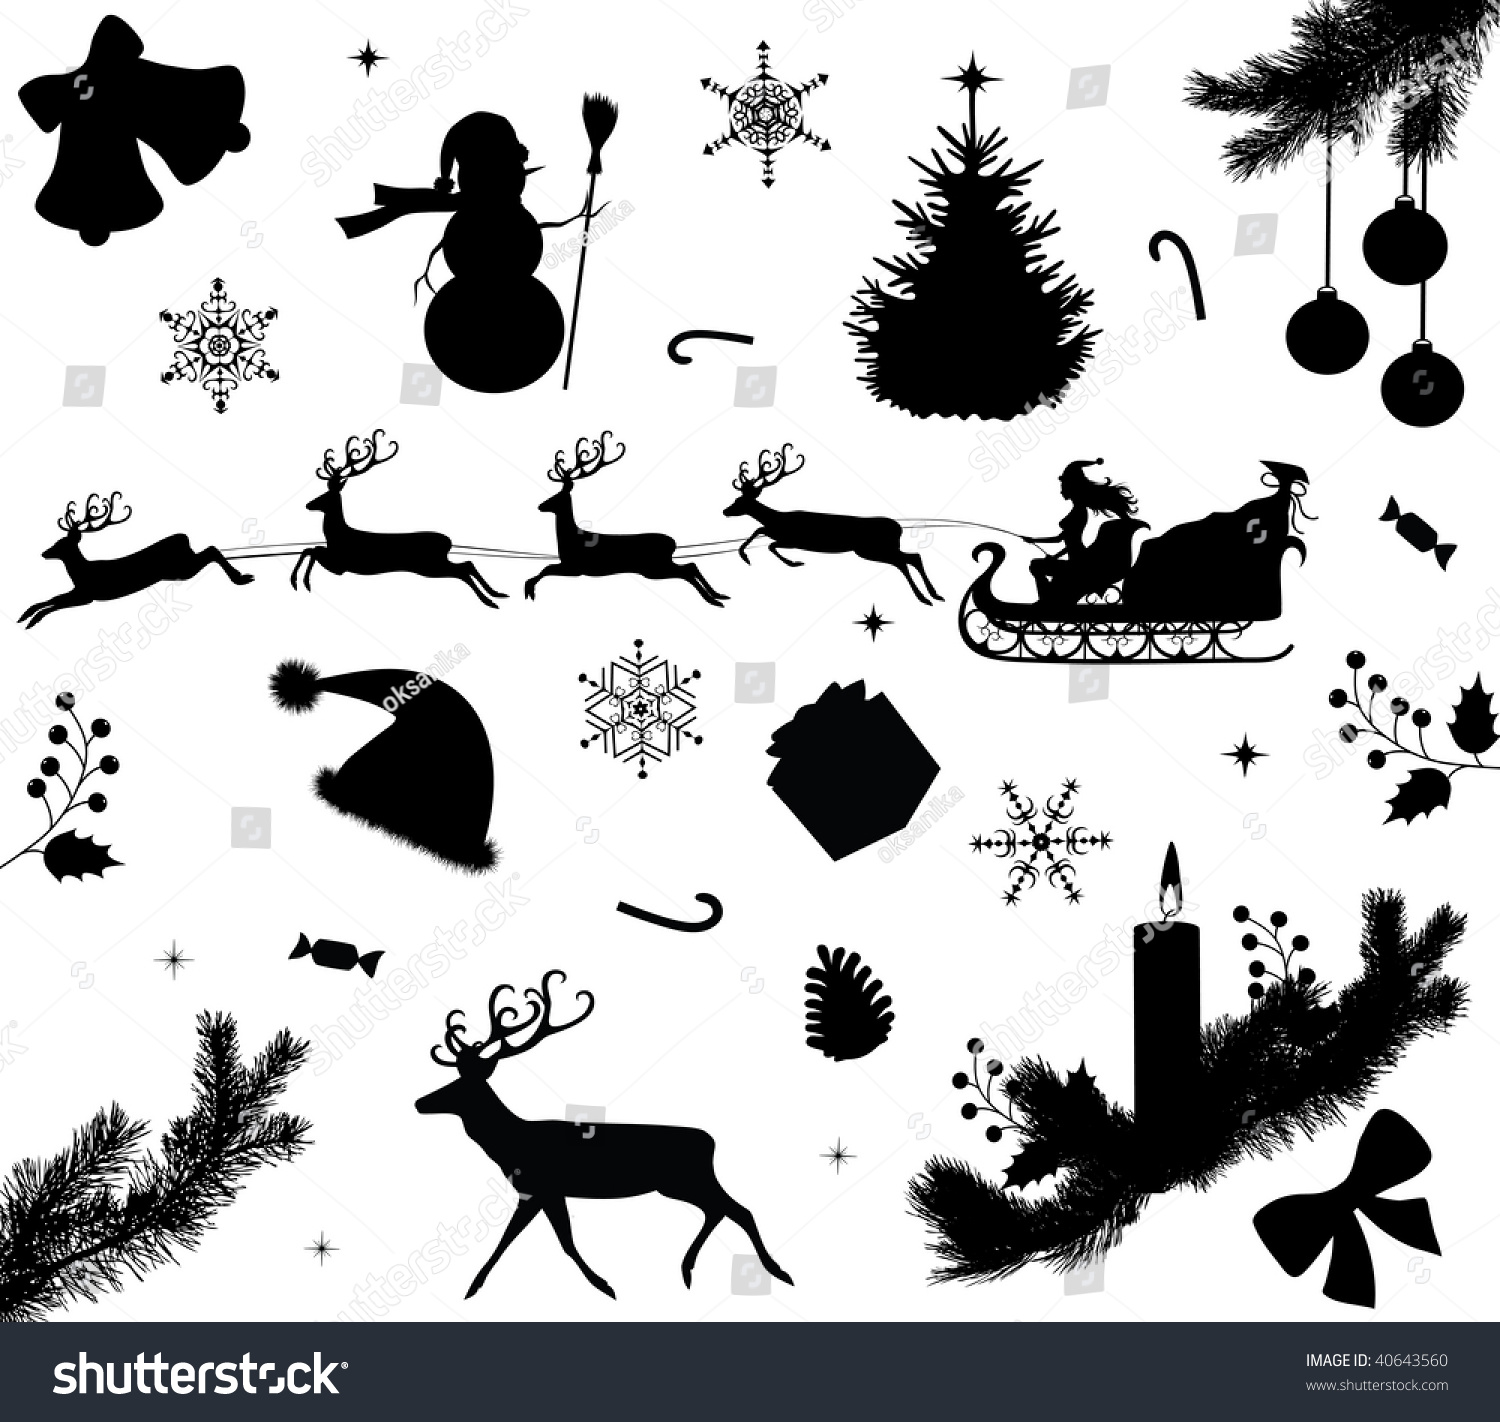 Collection Christmas Silhouettes Stock Vector 40643560 - Shutterstock